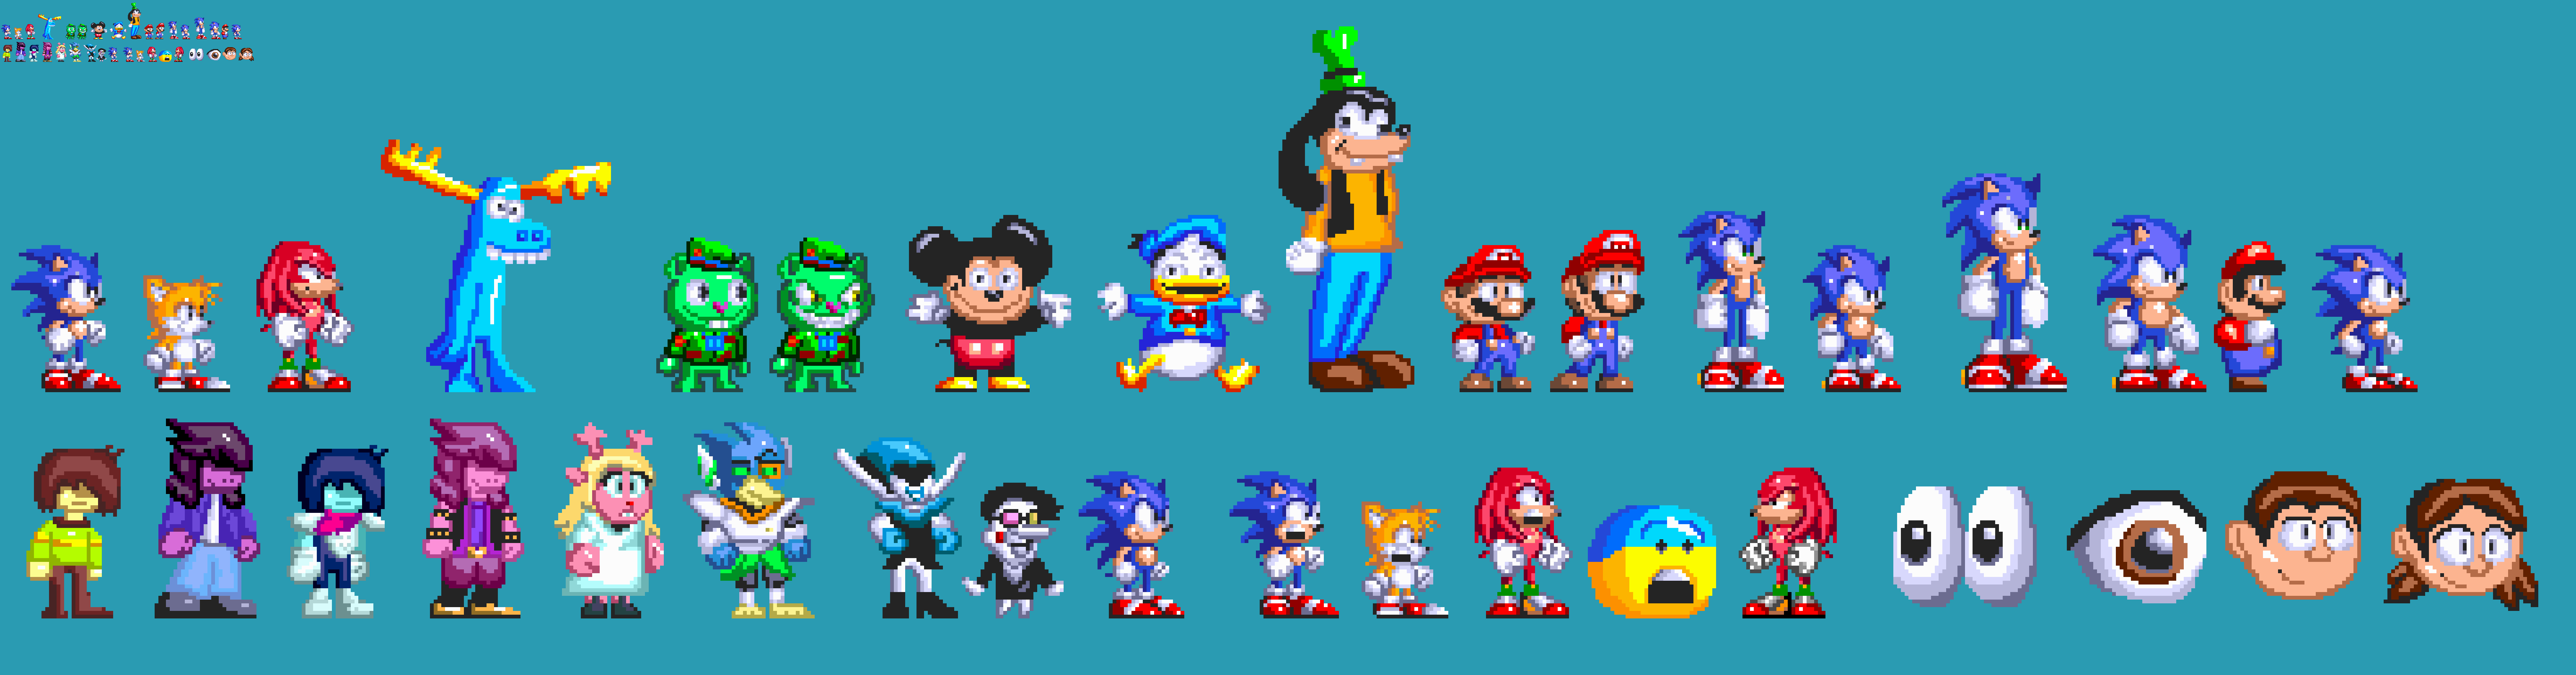 Open Assets] - Various Sonic 3 Styled Objects